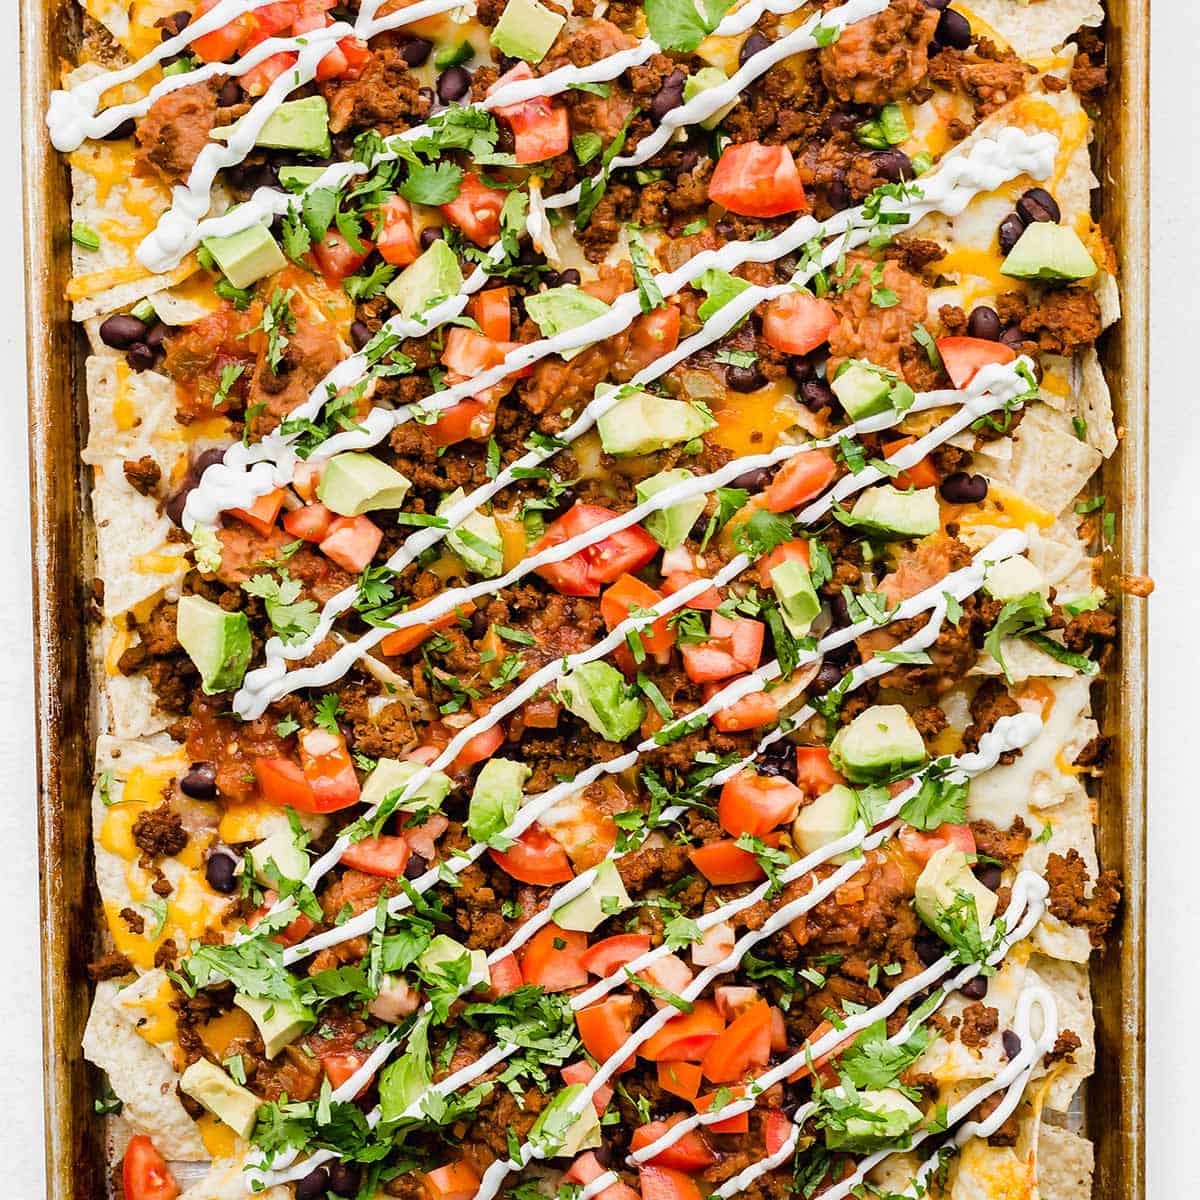 Sheet pan nachos topped with beef, sour cream, tomatoes, cilantro, and avocado.